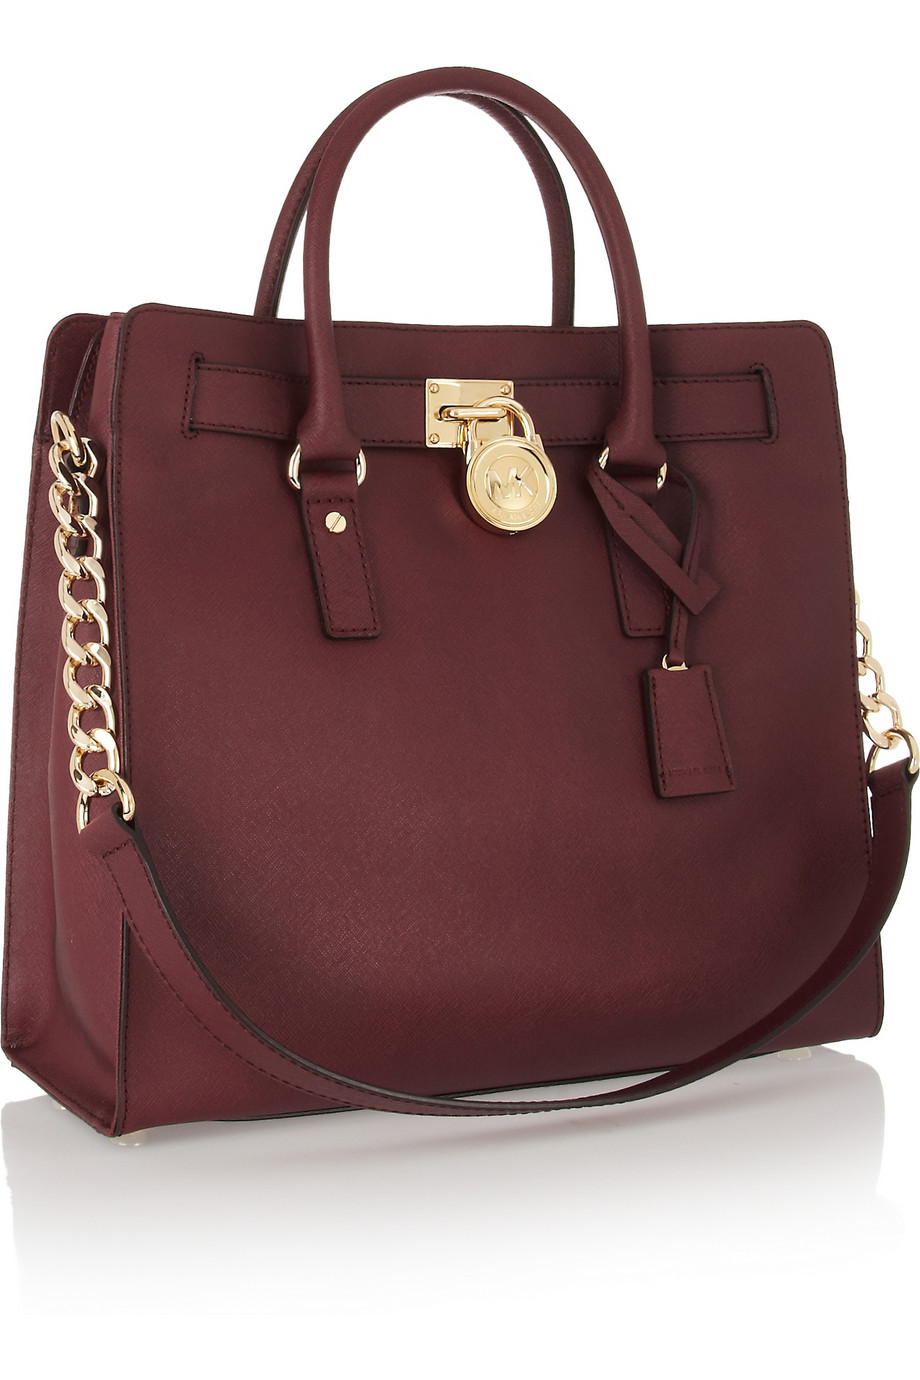 Michael Michael Kors Hamilton Large Textured Leather Tote in Purple - Lyst